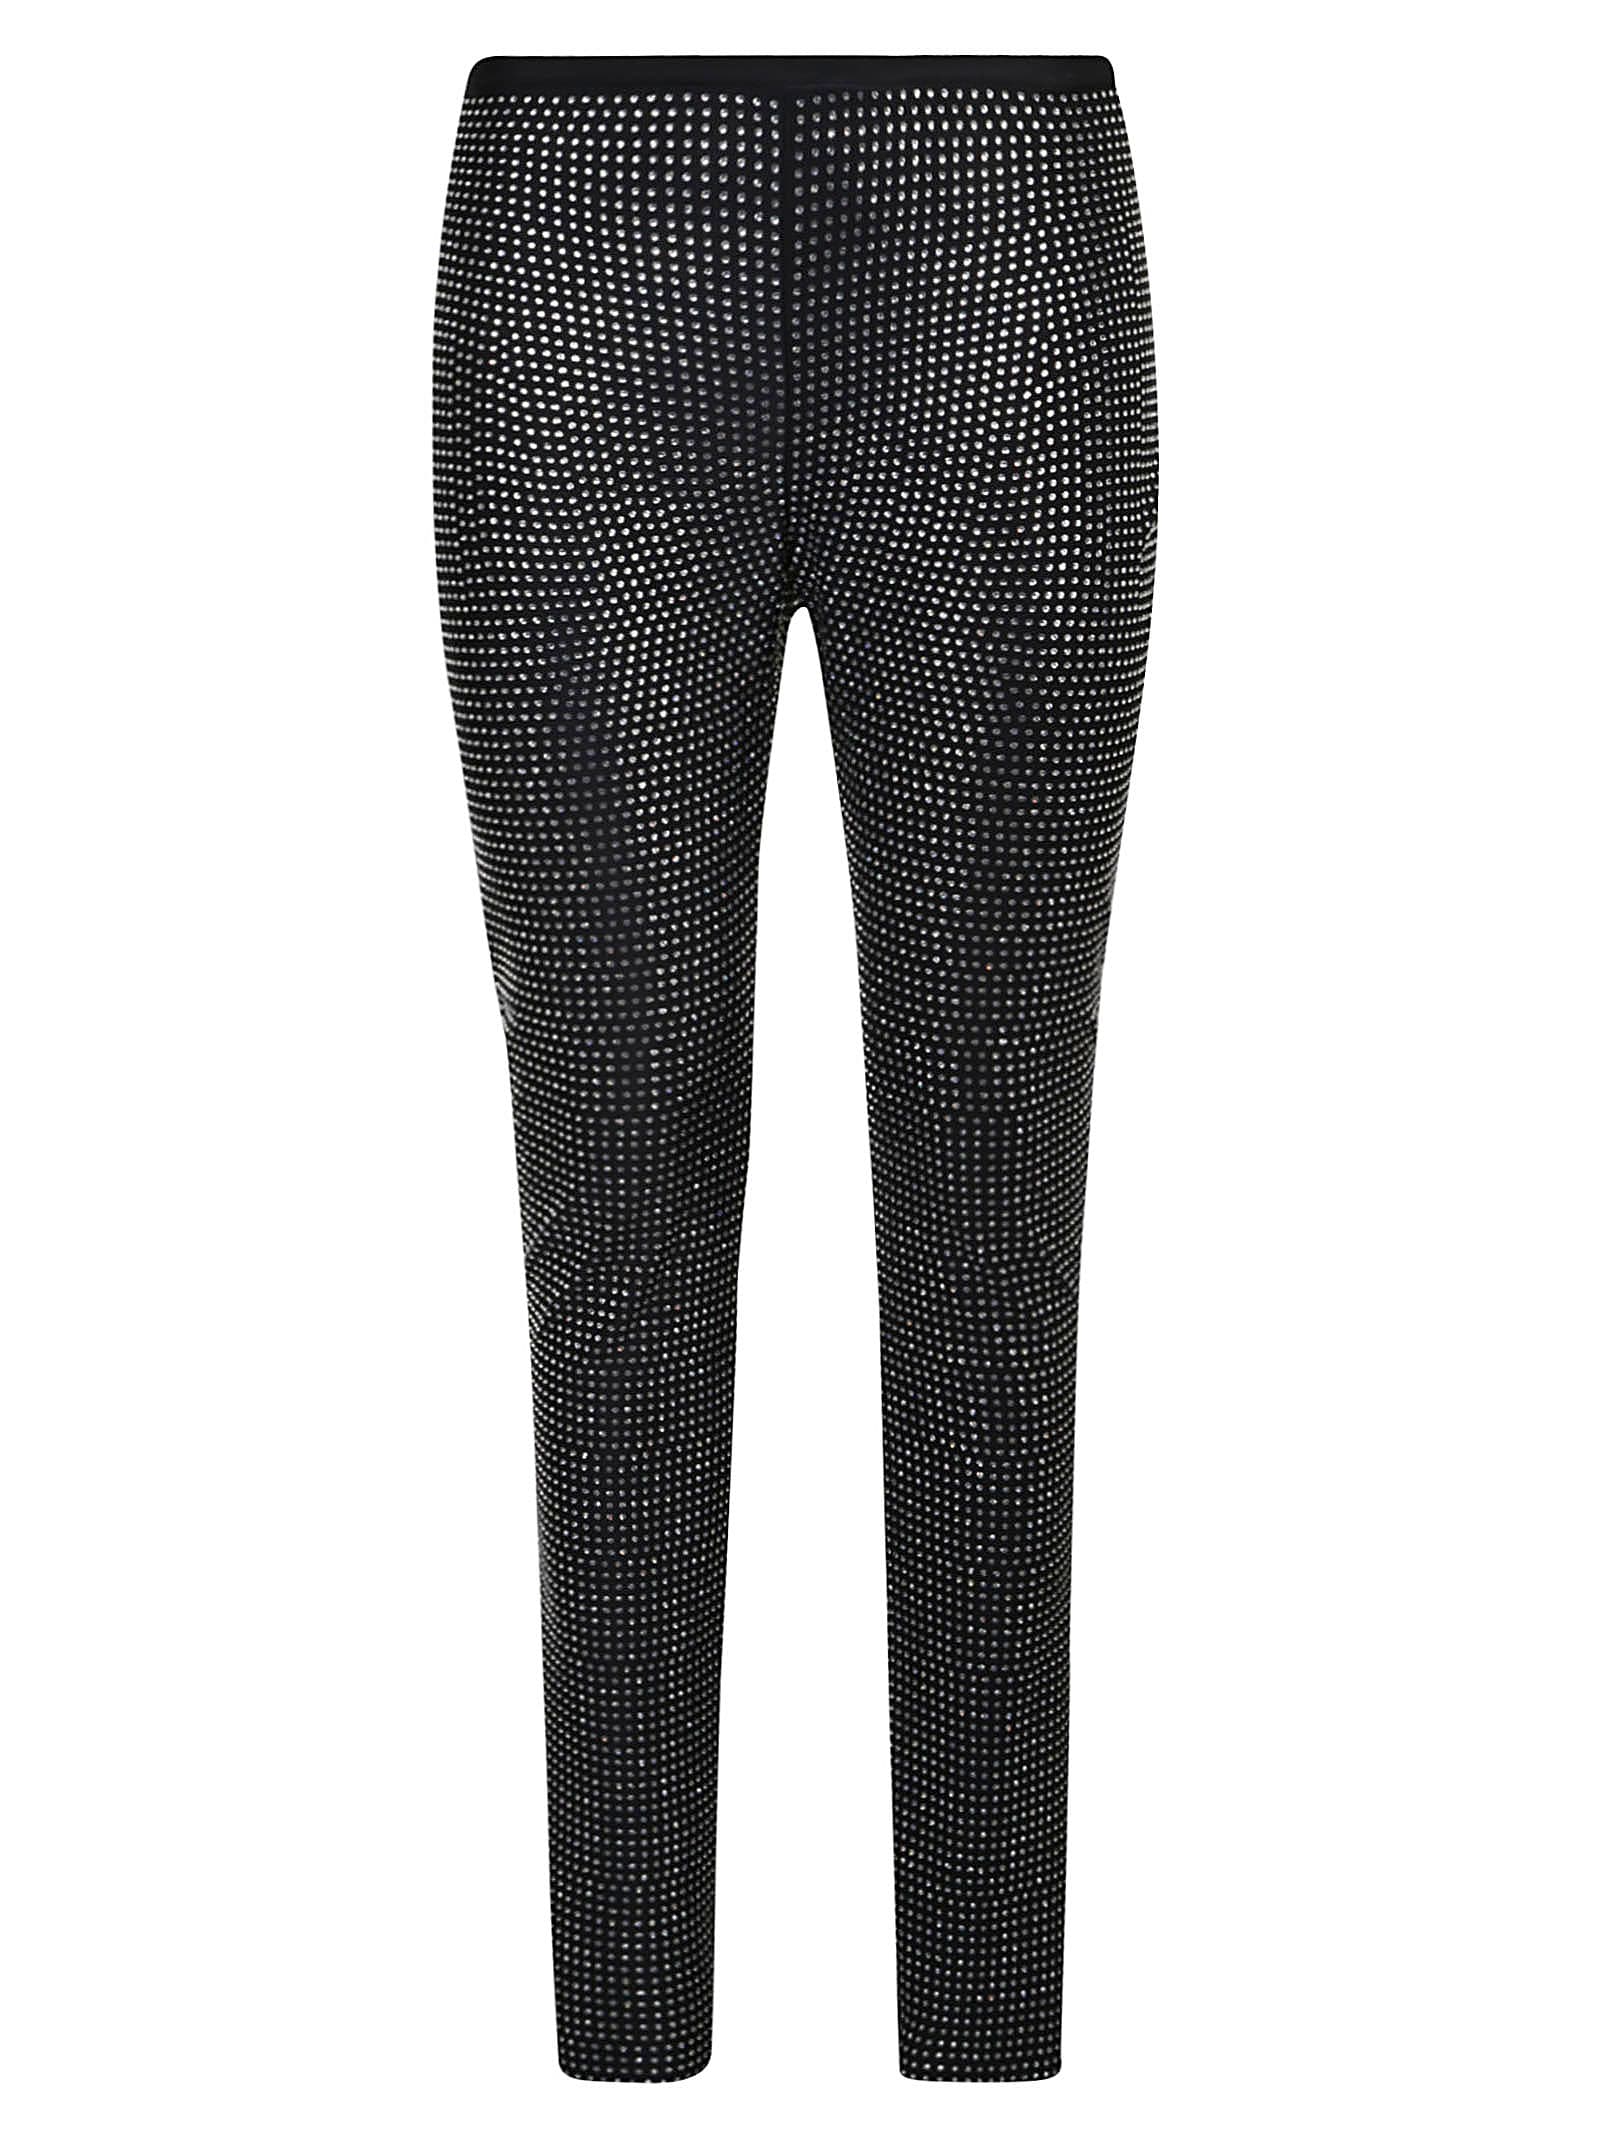 Giuseppe di Morabito All-over Crystal Embellished Trousers